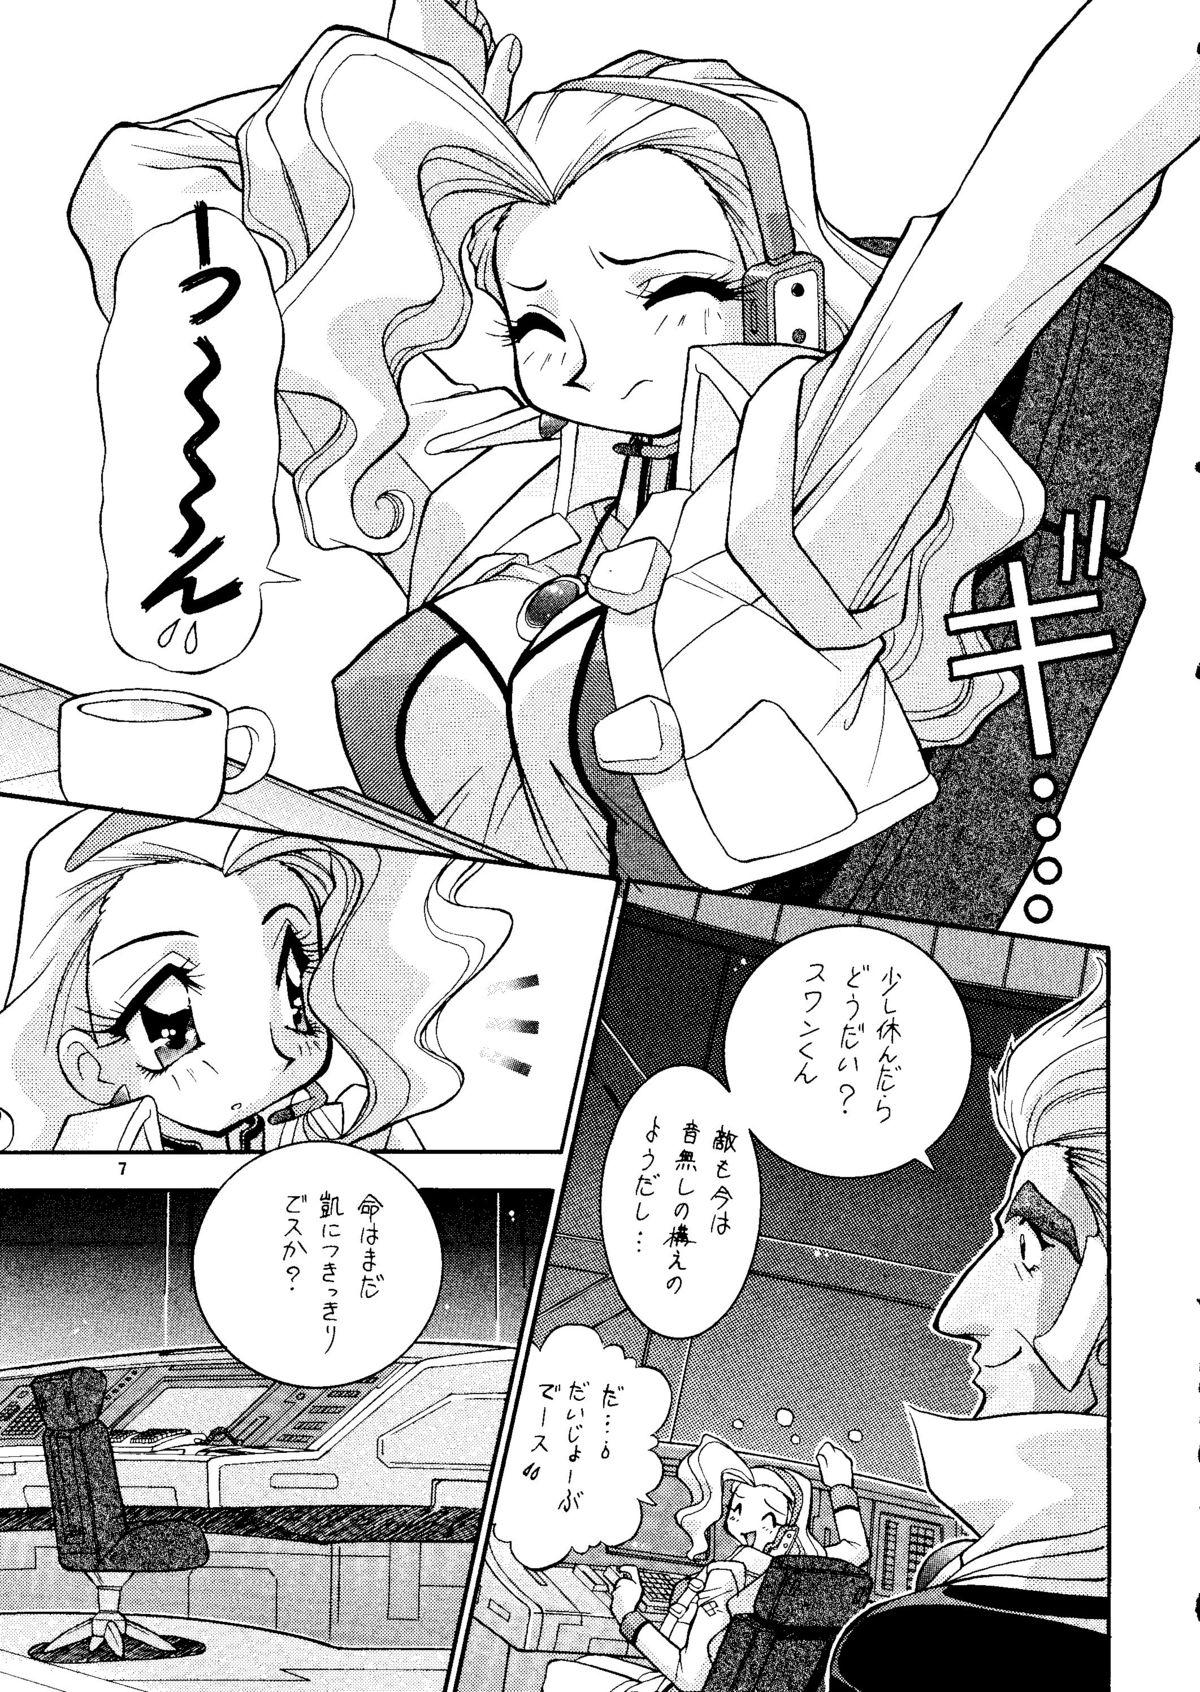 Sissy Yoseatume Galary 7 - Martian successor nadesico Gaogaigar Family Roleplay - Page 6